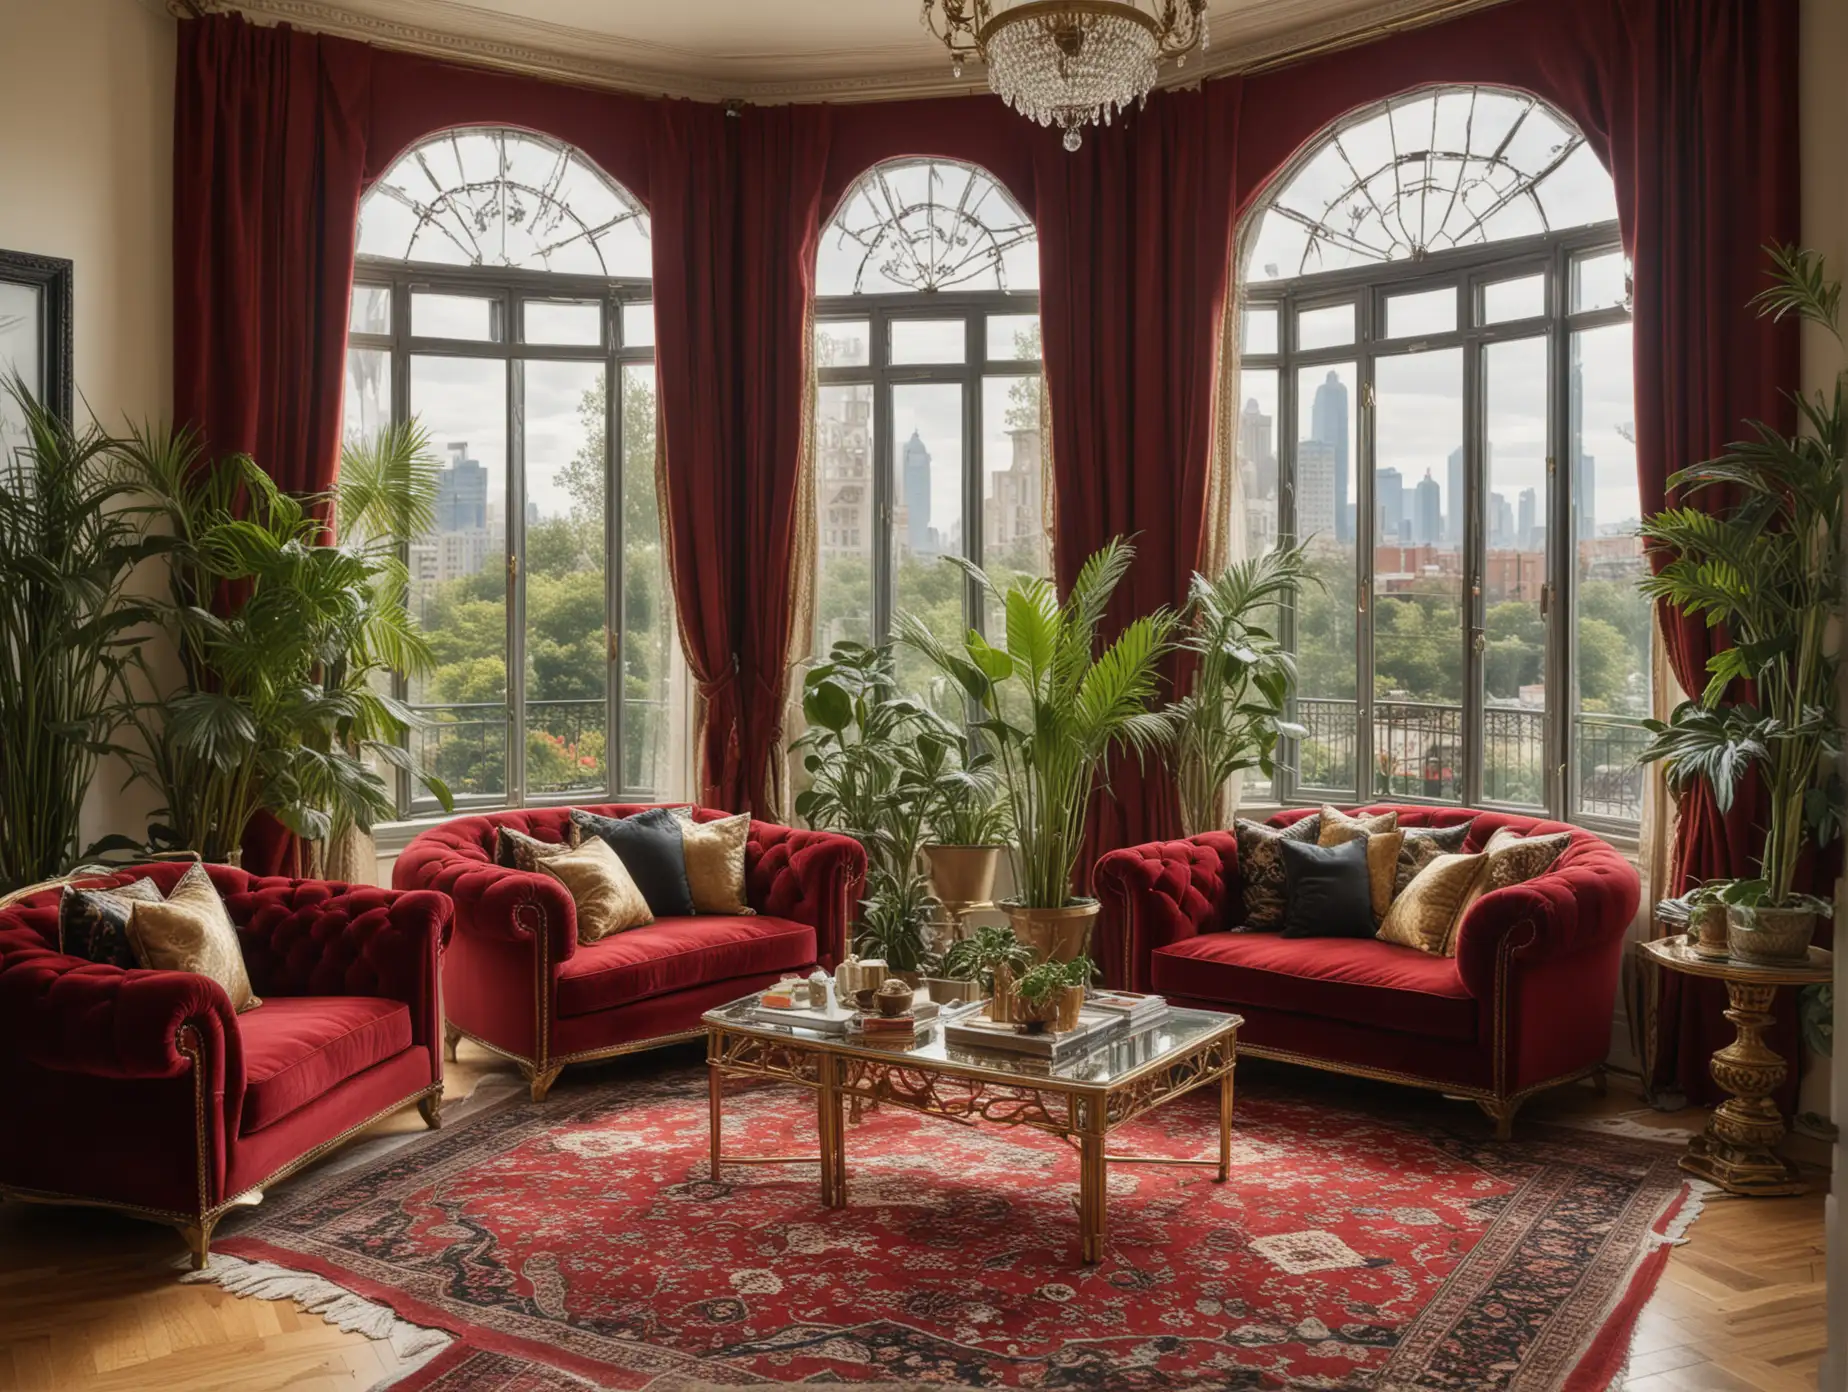 A lavish Art Deco sitting area featuring a deep red velvet sofa, gold and black throw pillows, a glass coffee table with gold accents, and a richly patterned Persian rug. House plants in metallic planters add a touch of greenery. The wide shot showcases tall windows with arched frames, offering a sunny view of a bustling cityscape, with light streaming in and casting intricate shadows on the parquet floor.